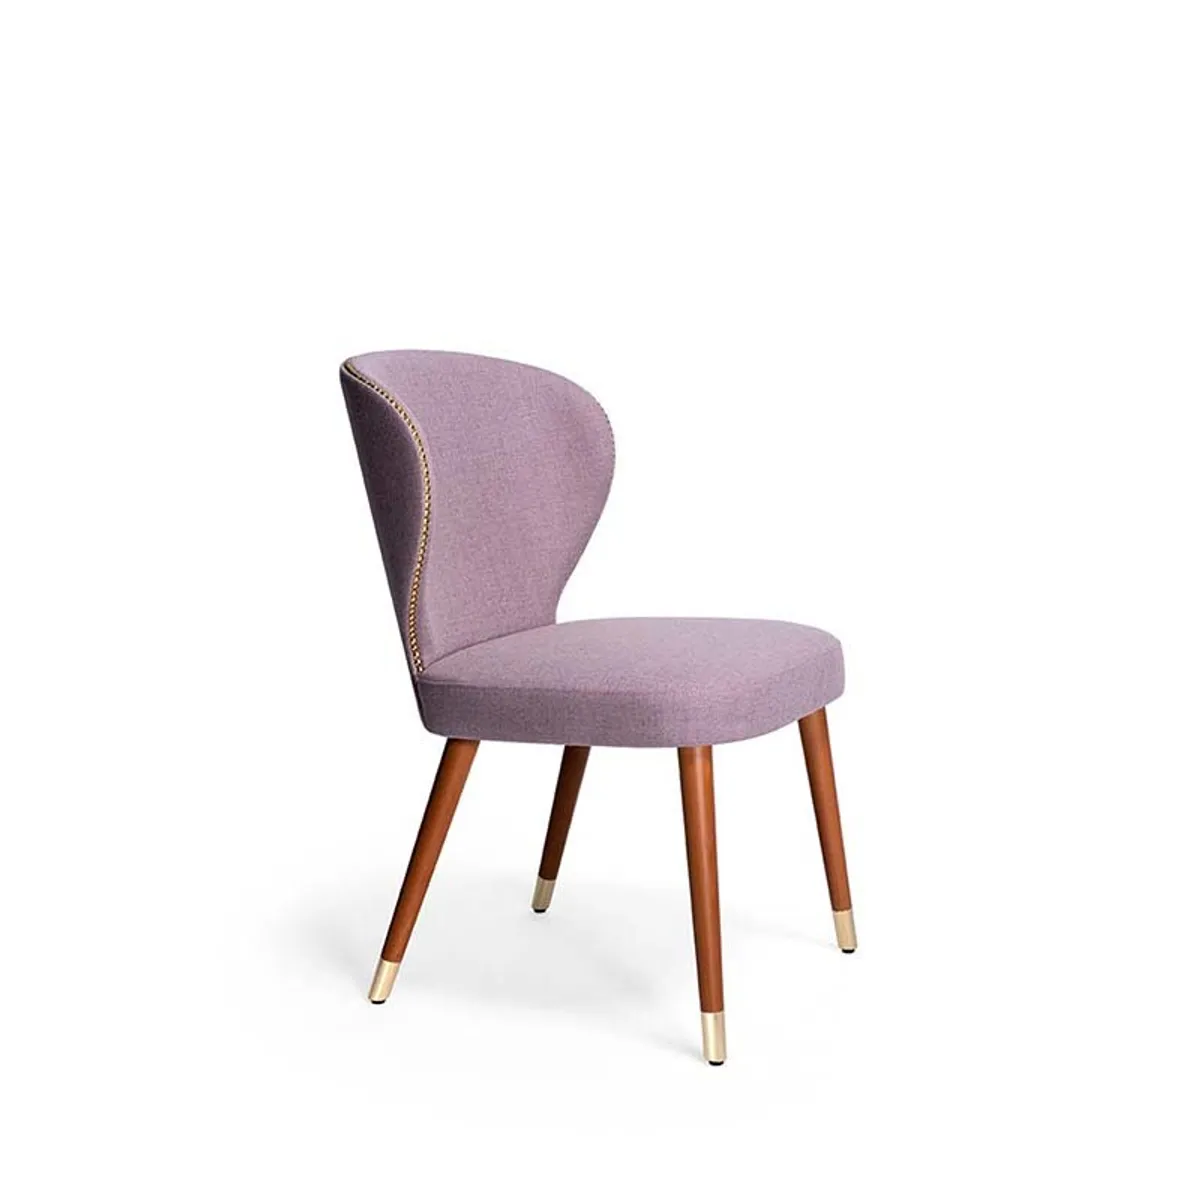 Abbraccio Scl Extra Deluxe Side Chair Inside Out Contracts